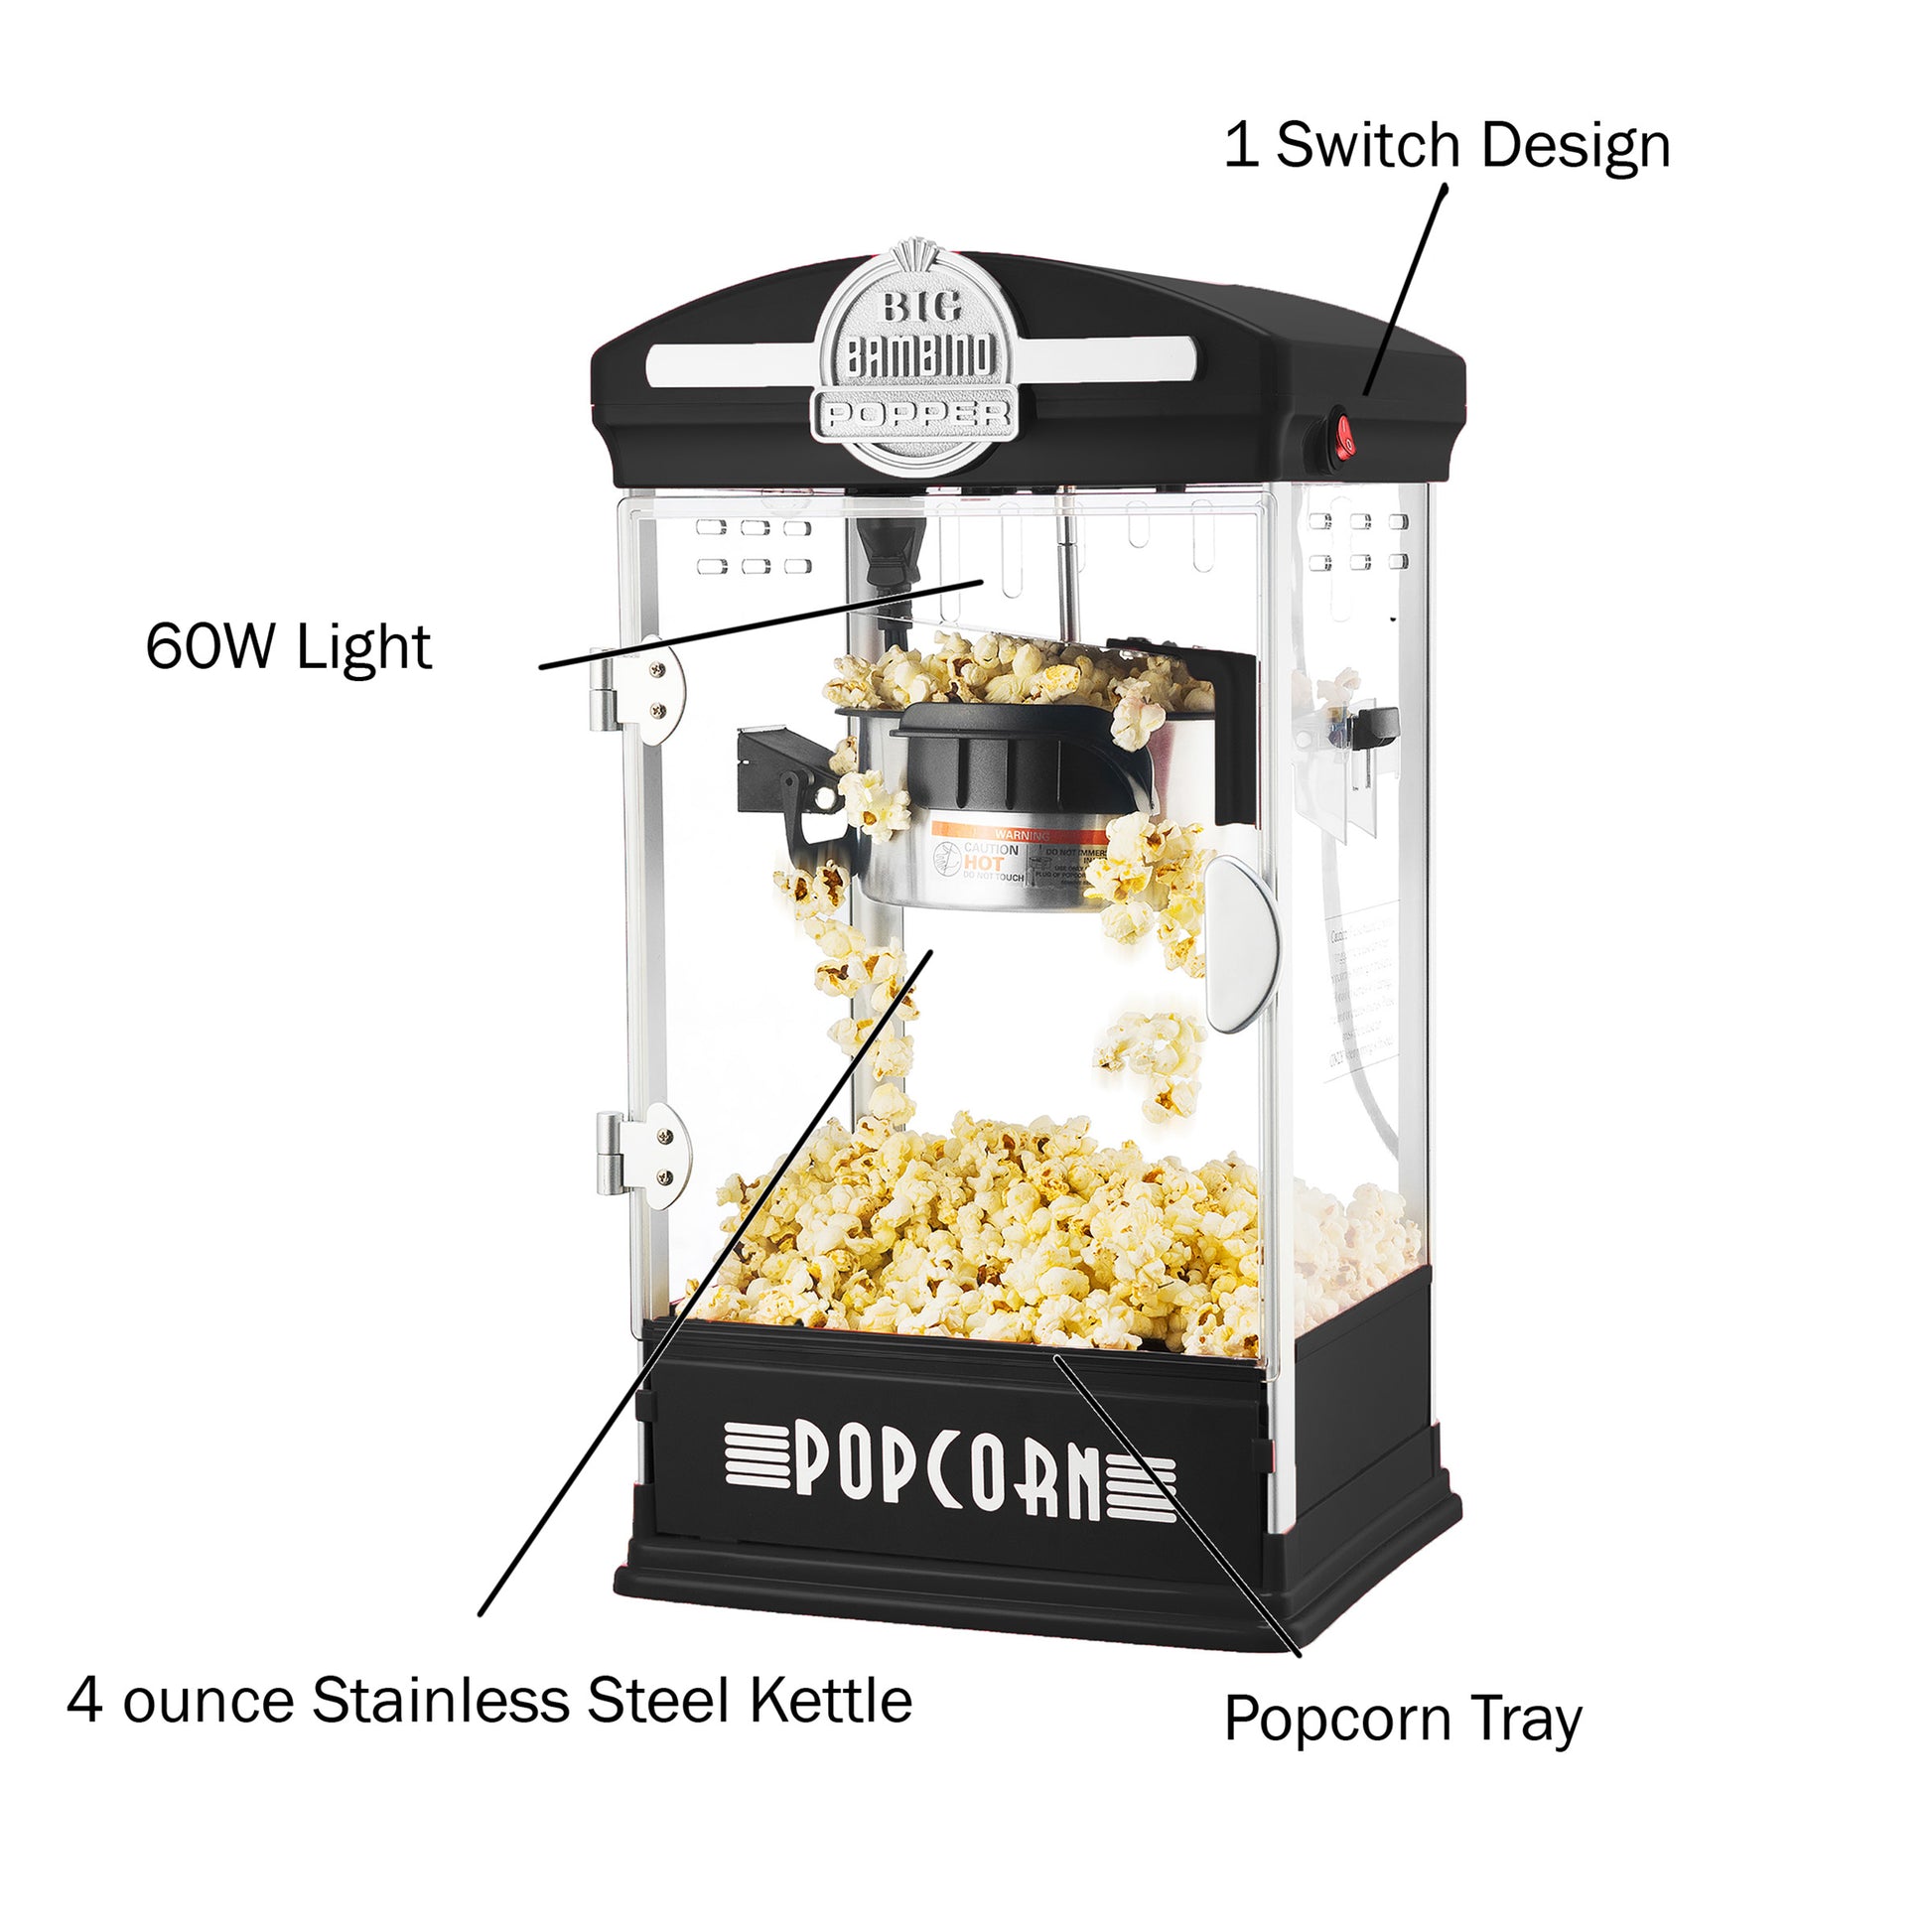 Great Northern 4 oz. Black Big Bambino Old-Fashioned Popcorn Machine with Kettle, Measuring Cups, Scoop, and Serving Cups